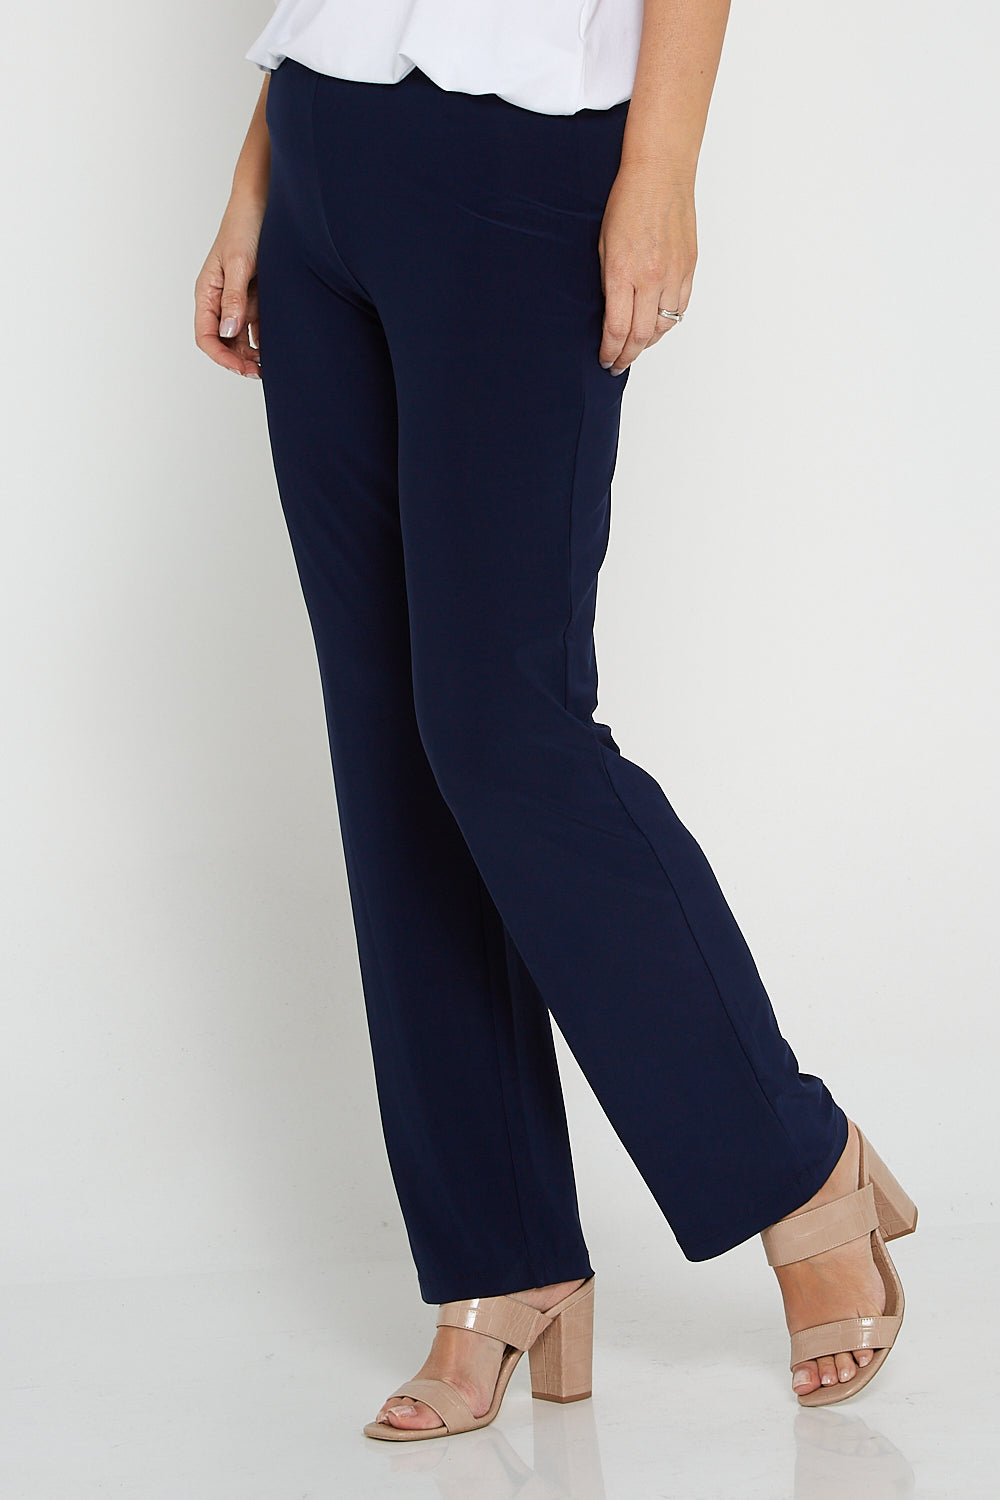 Discover 145+ travel trousers for ladies latest